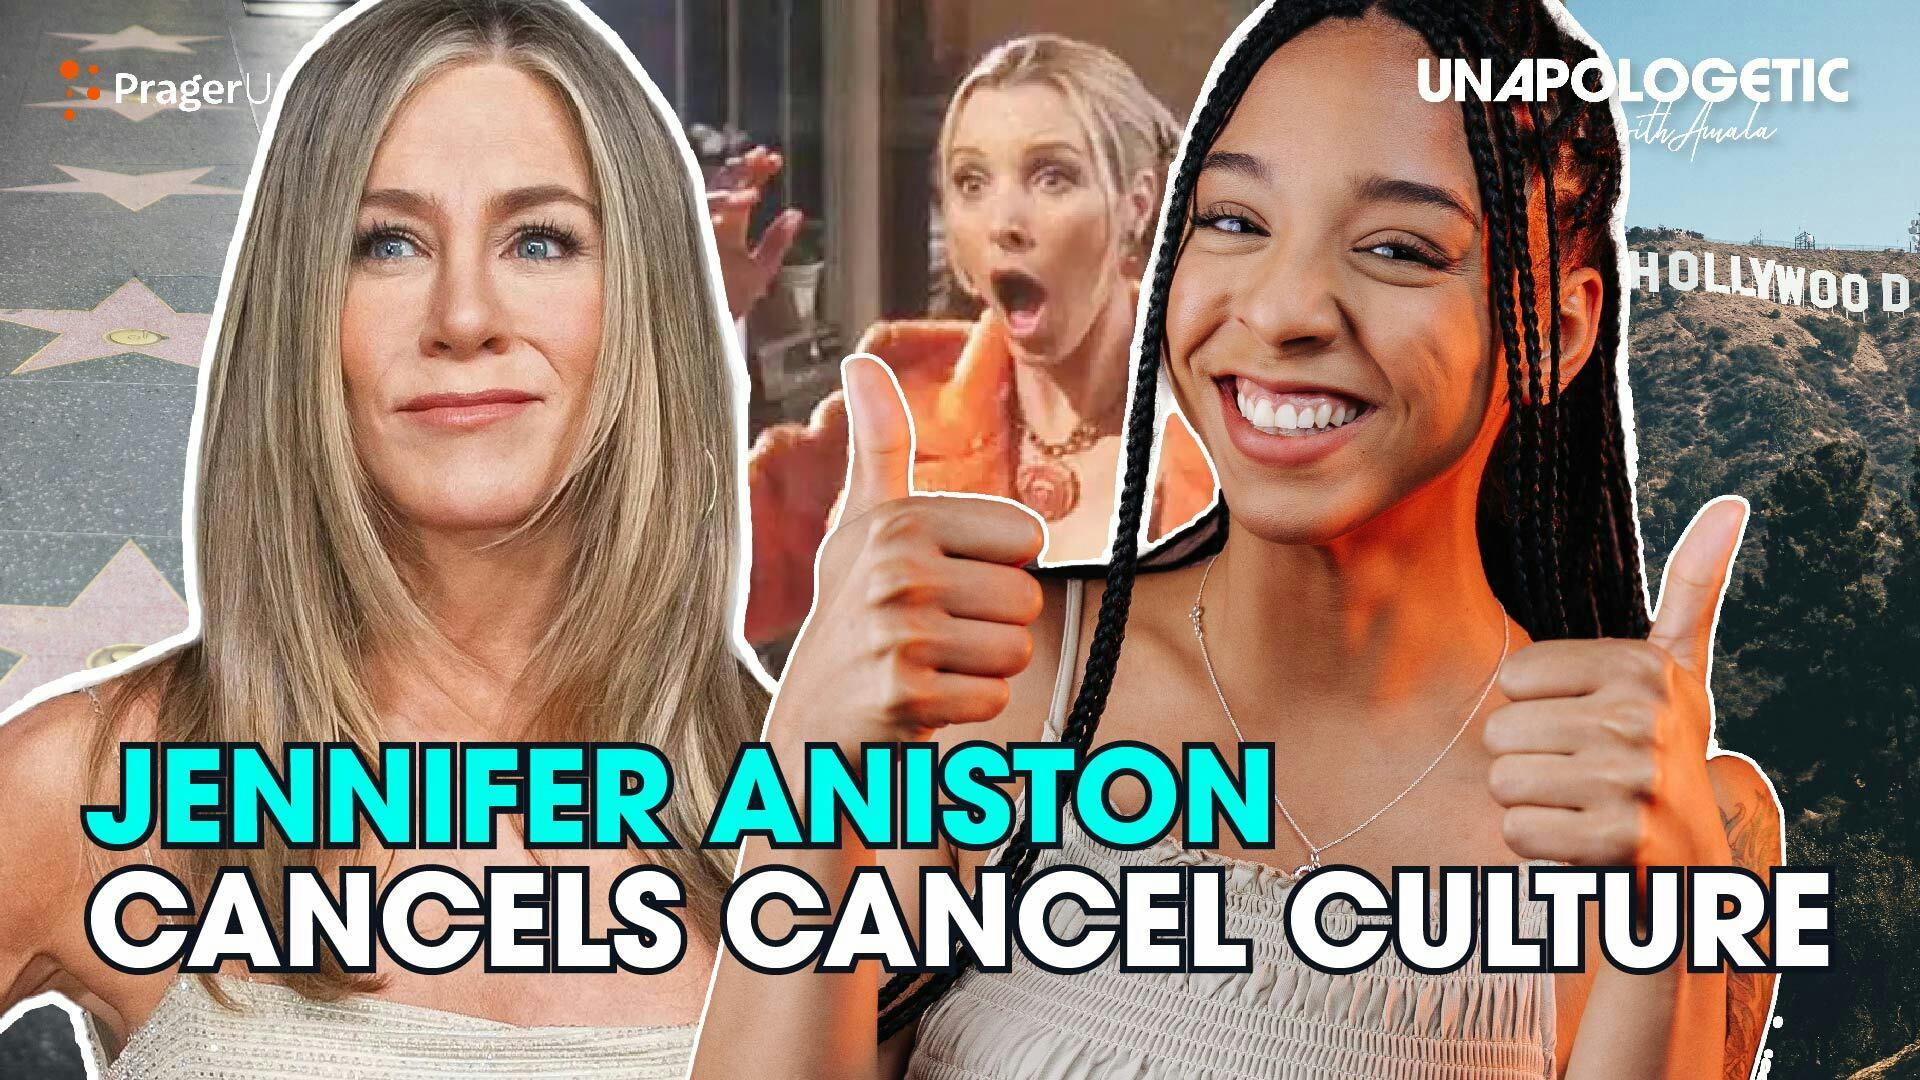 Jennifer Aniston Is “So Over” Cancel Culture